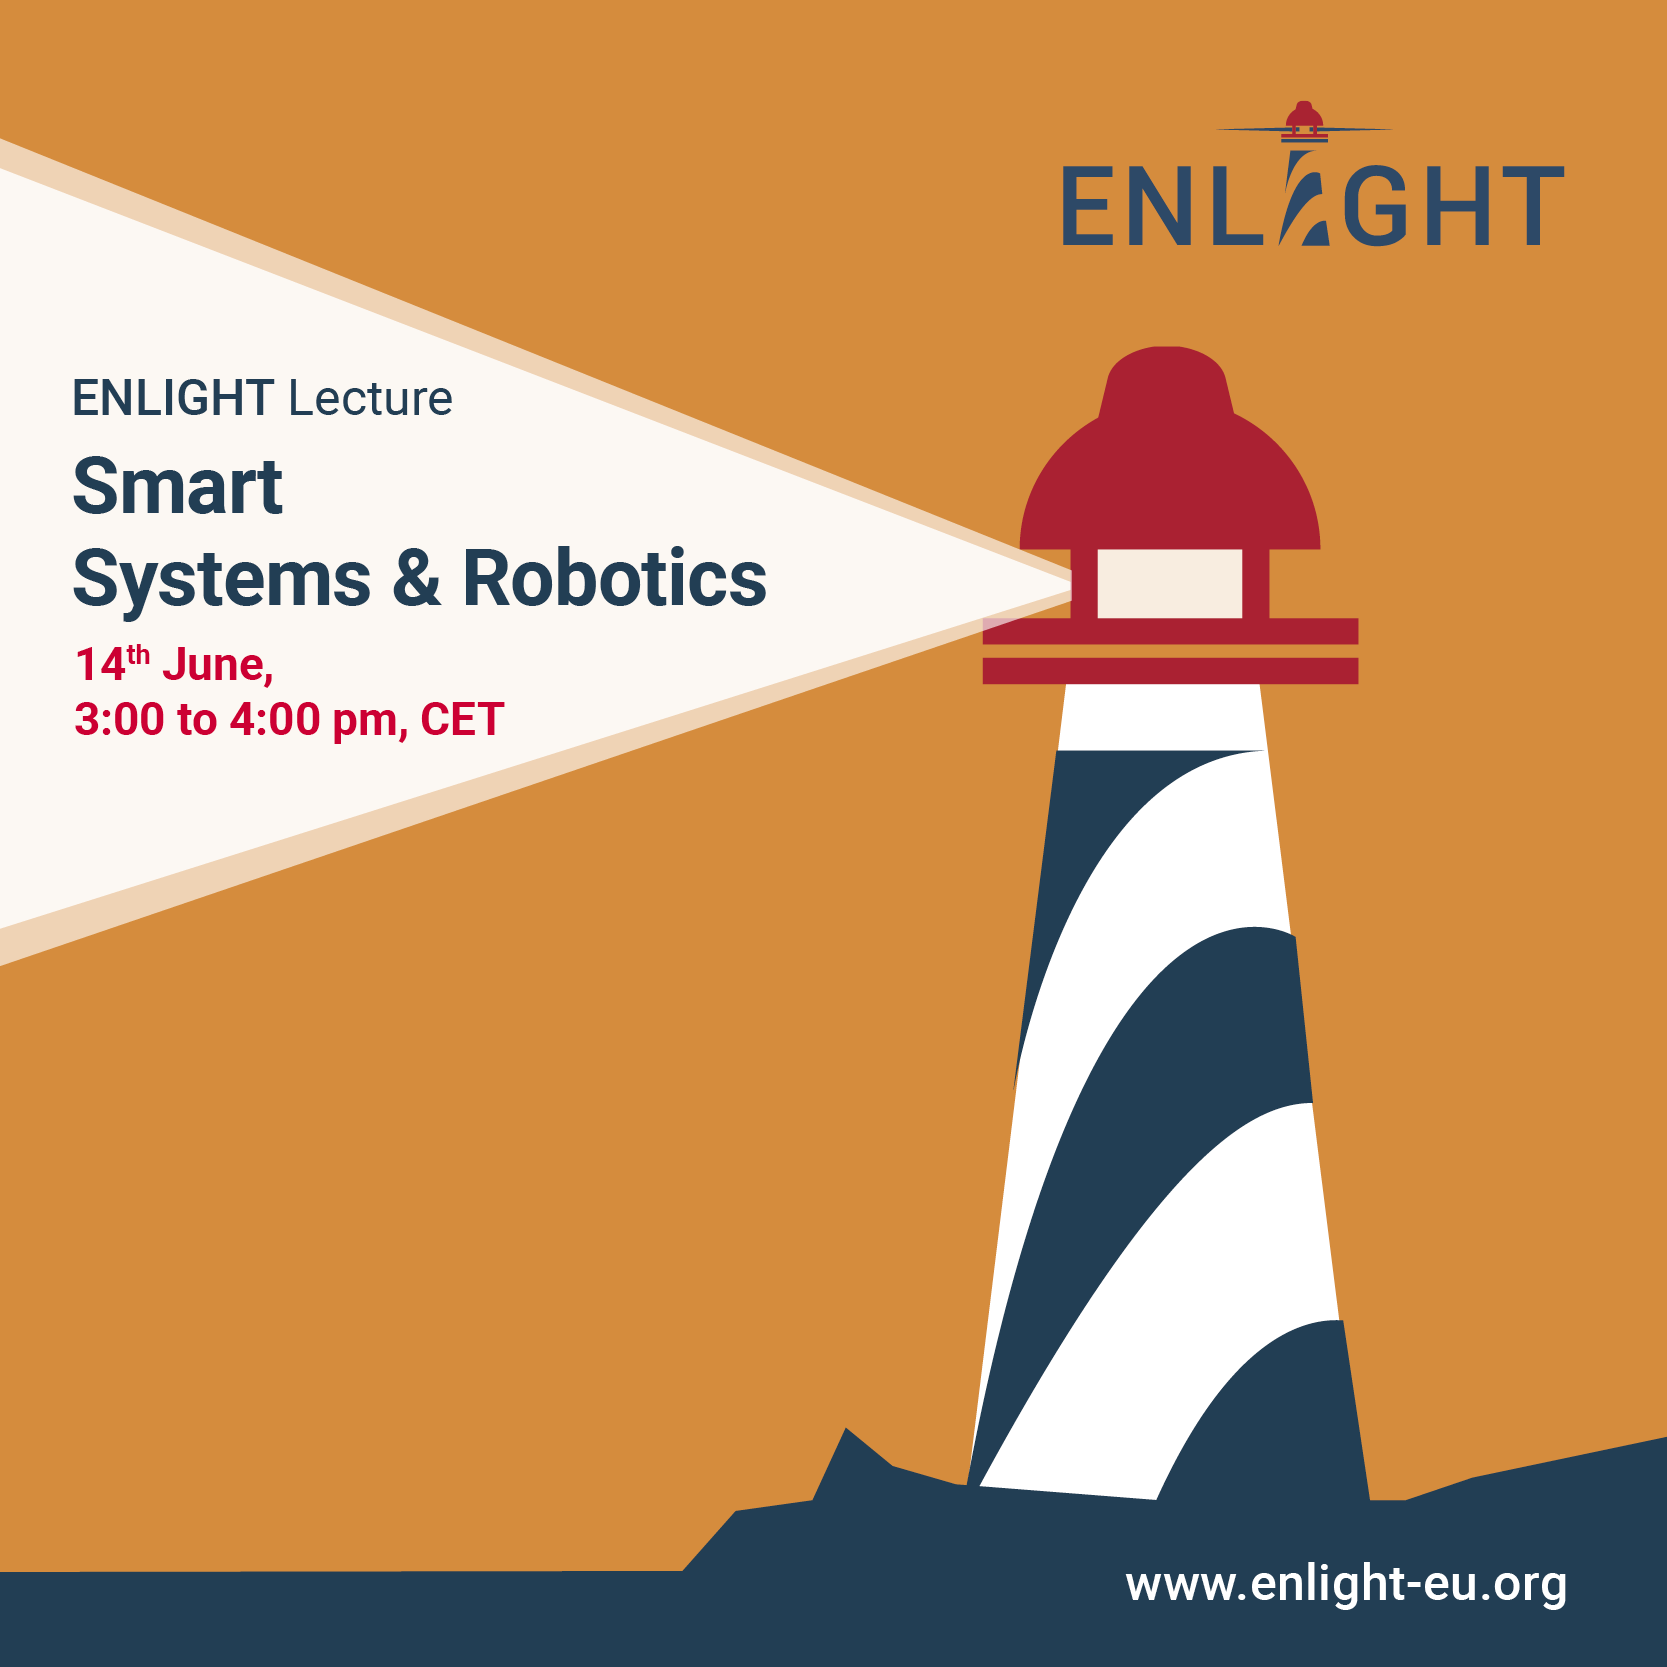 ENLIGHT Lecture on “Smart Systems & Robotics